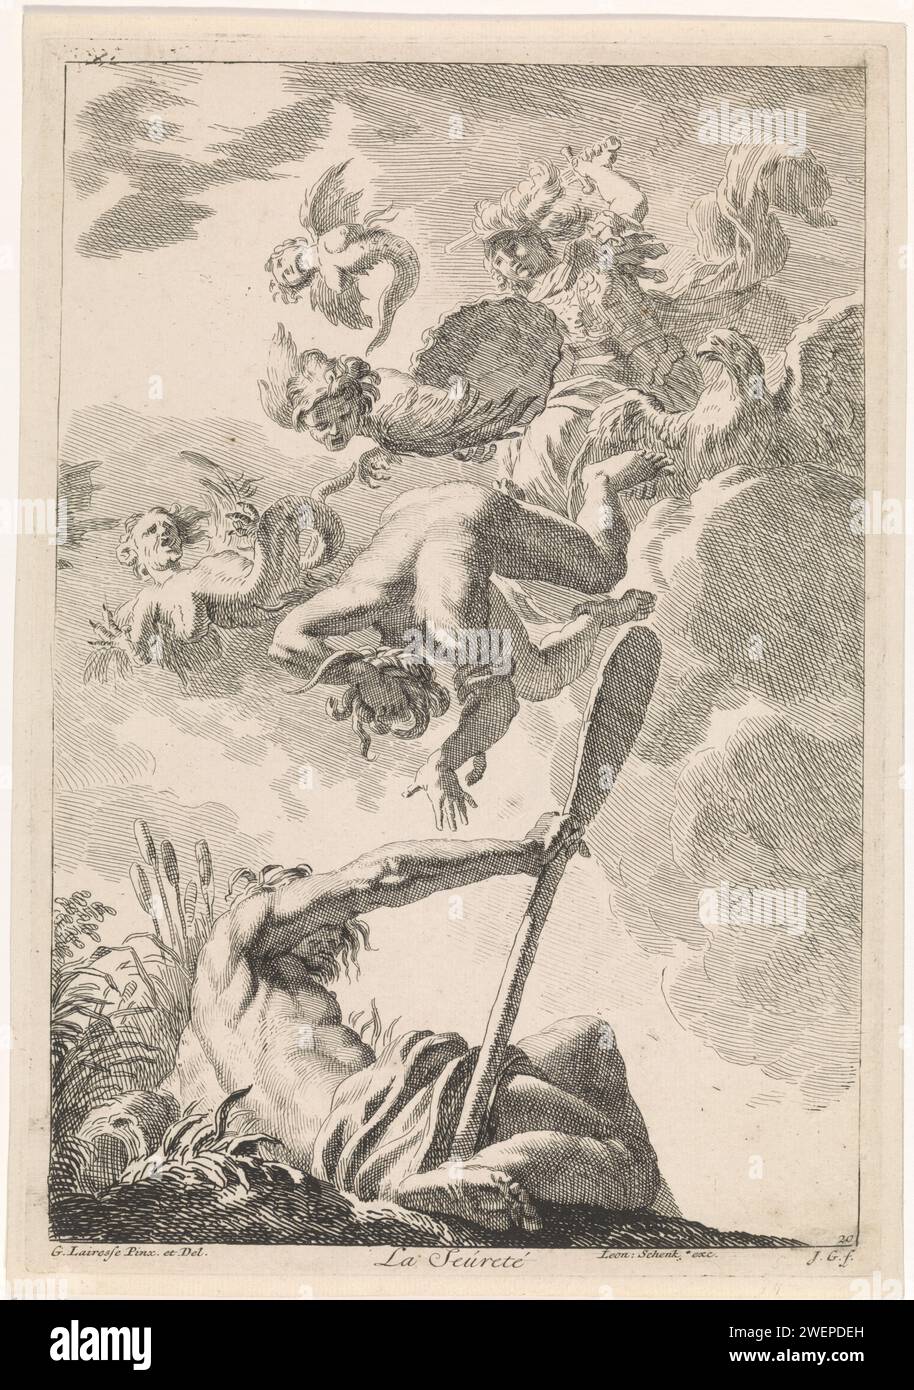 Minerva shifts envy: an allegory by certainty, Johannes Glaber, after Gerard de Lairesse, 1672 - 1726 print The goddess Minerva shifts three harpes and the personification of envy from heaven. In the foreground the personification of the river Amstel. The print is to a ceiling painting by Gerard de Lairesse and is part of a series with Biblical, mythological and allegorical representations.  paper etching (story of) Minerva (Pallas, Athena). Envy; 'Invidia' (Ripa)  personification of one of the Seven Deadly Sins. river personified, 'Fiumi' (Ripa). Harpies (classical mythology) Amstel (river) Stock Photo